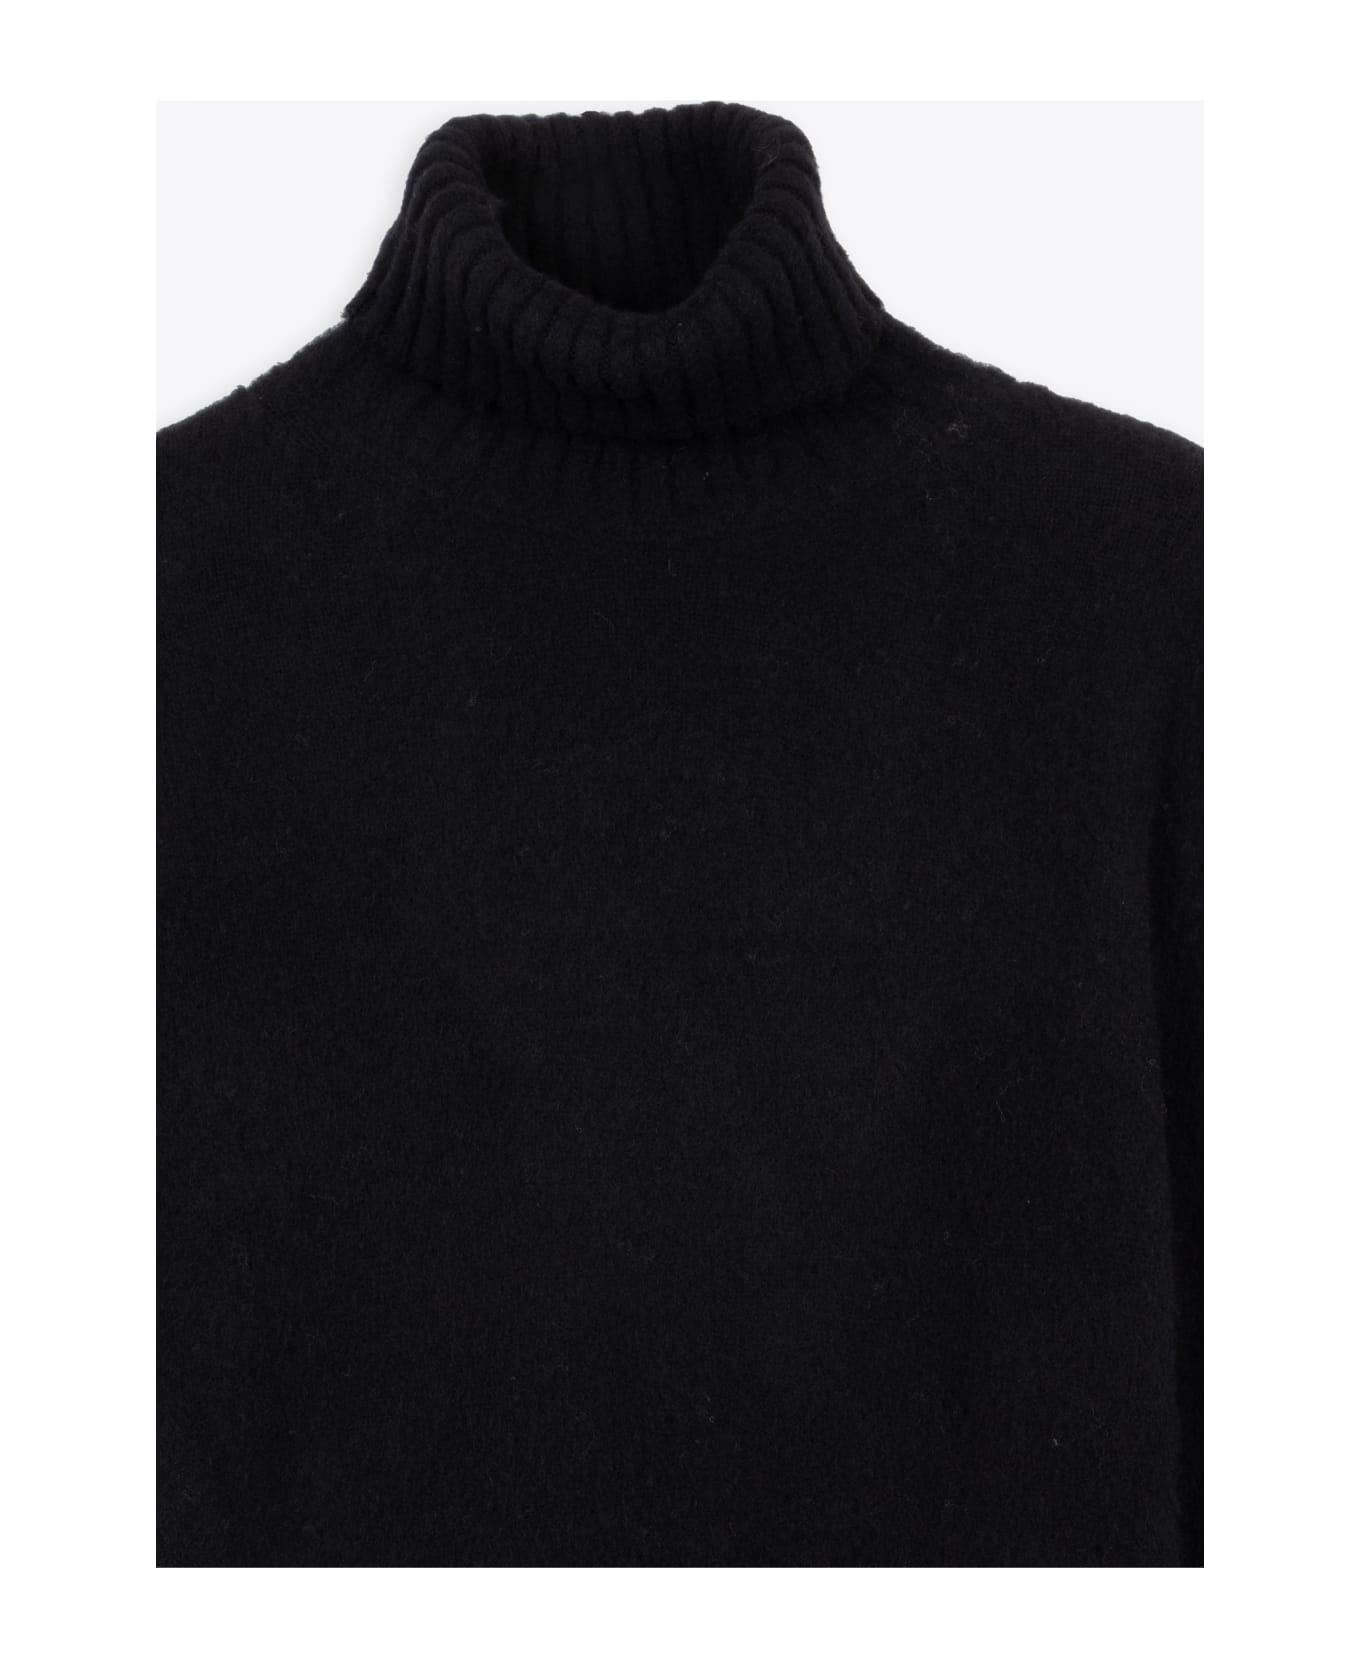 Piacenza Cashmere Dolcevita Black wool sweater with high neck - Nero